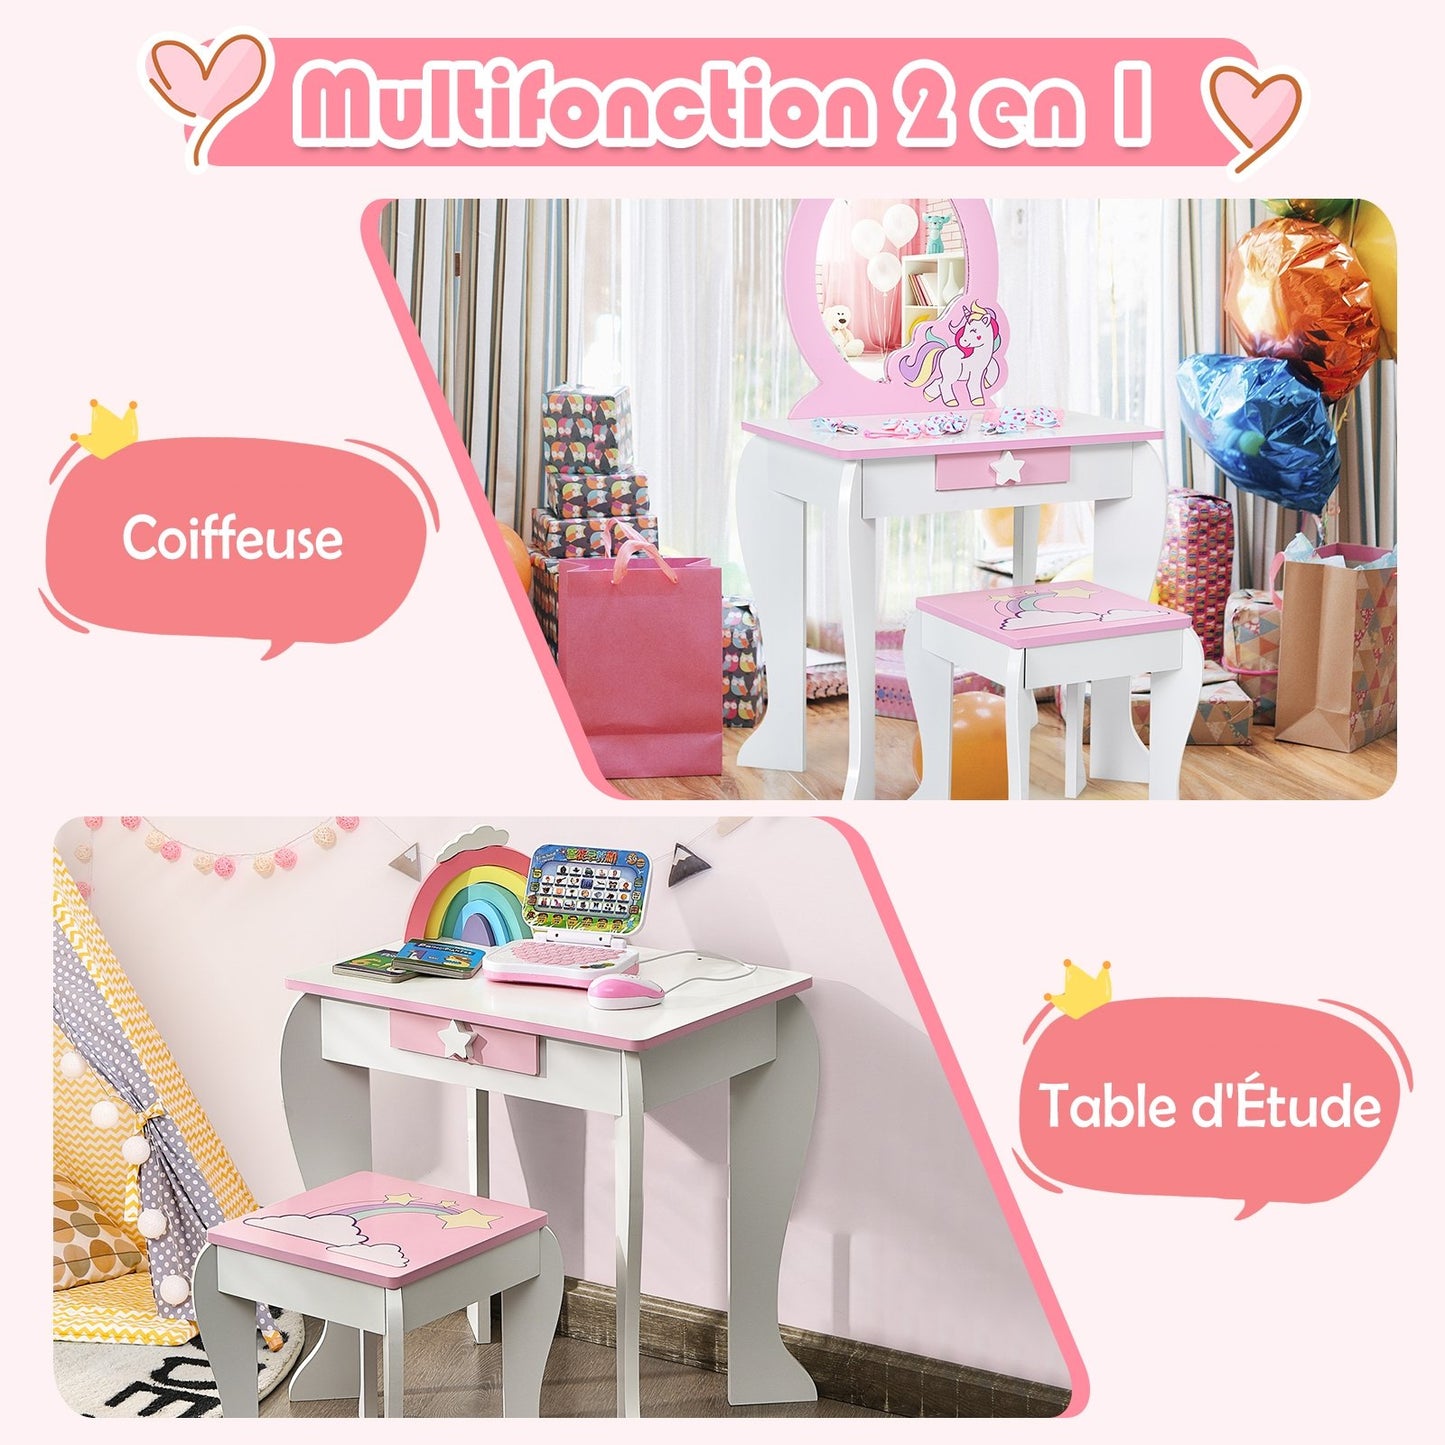 Kids Wooden Makeup Dressing Table and Chair Set with Mirror and Drawer, White at Gallery Canada